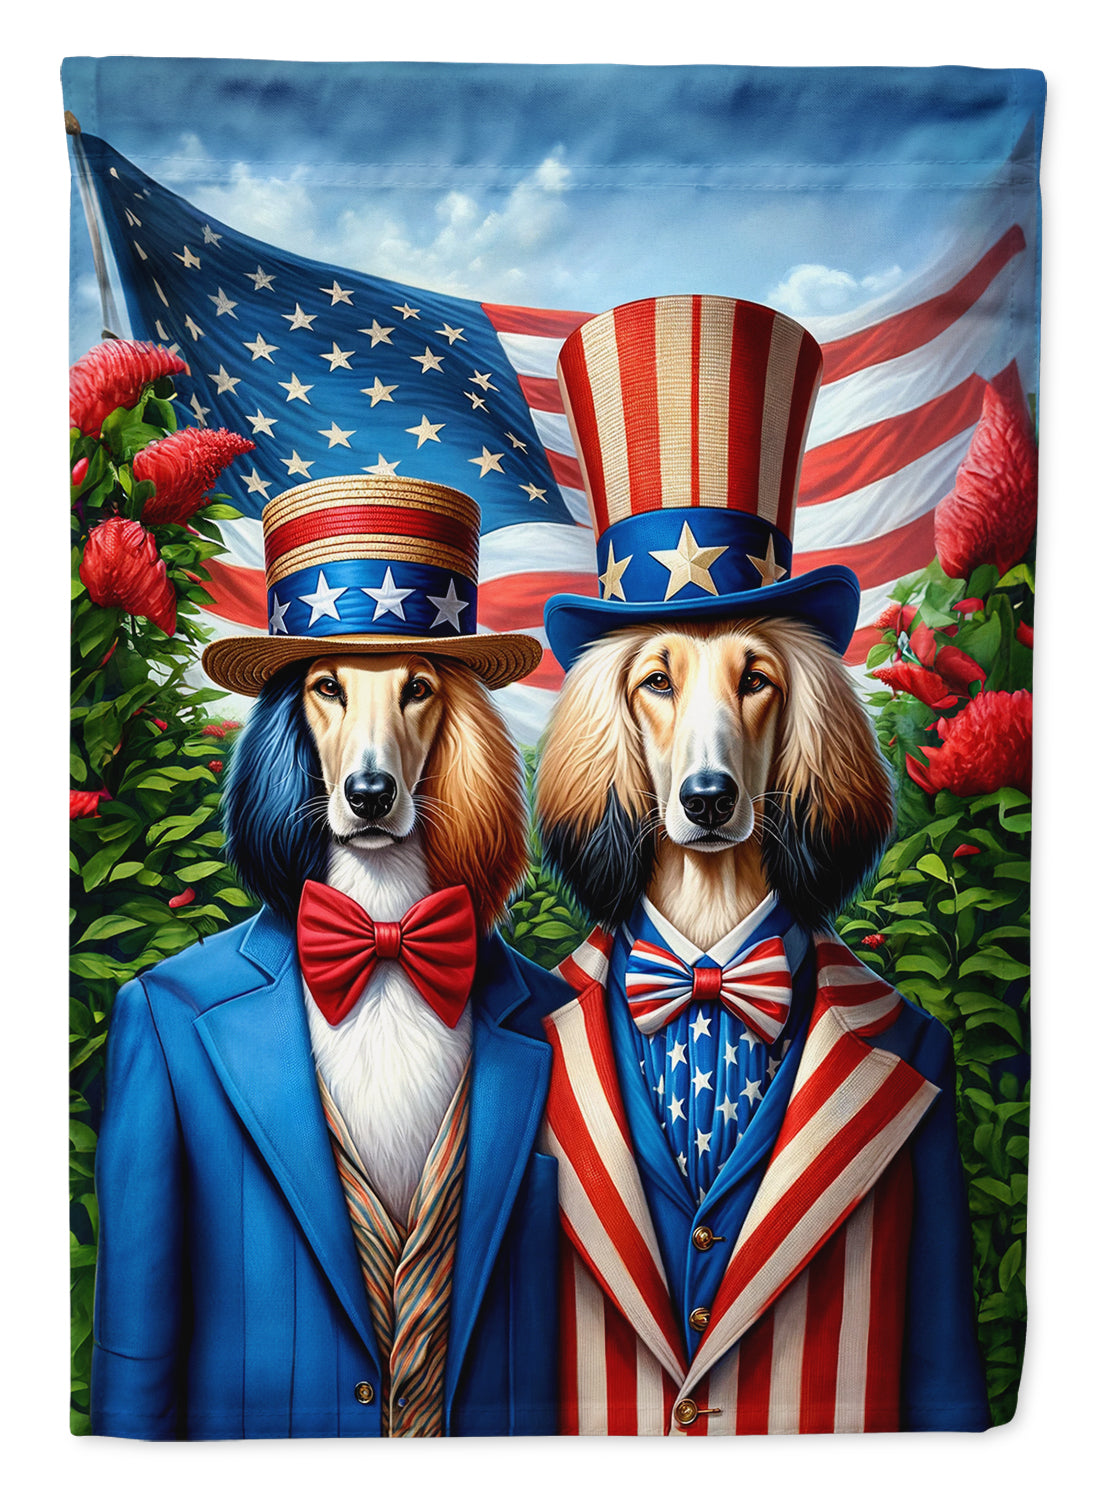 Buy this All American Afghan Hound House Flag